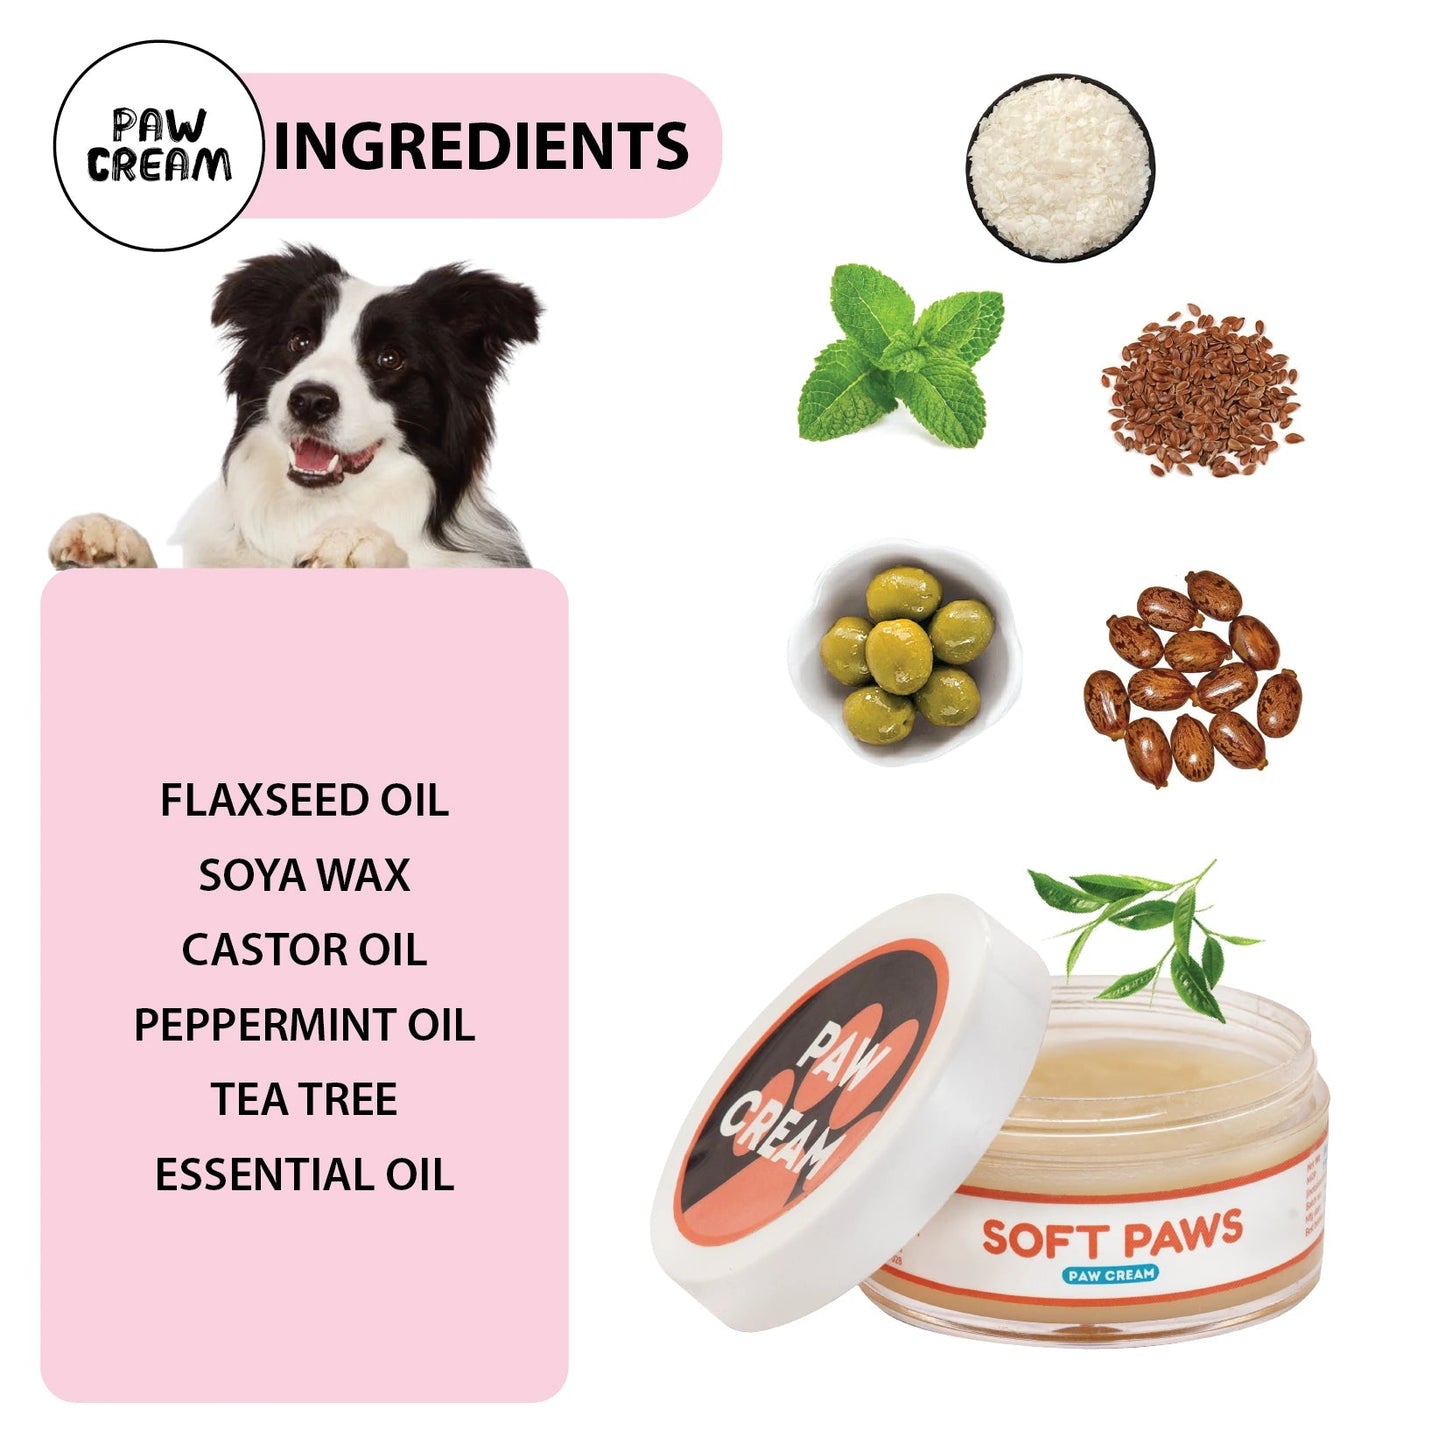 Paw Cream Ingredients: Soy Wax, Flaxseed Oil, Castor Oil, Olive Oil, Peppermint Essential Oil, Tea Tree Essential Oil, and Vitamin E